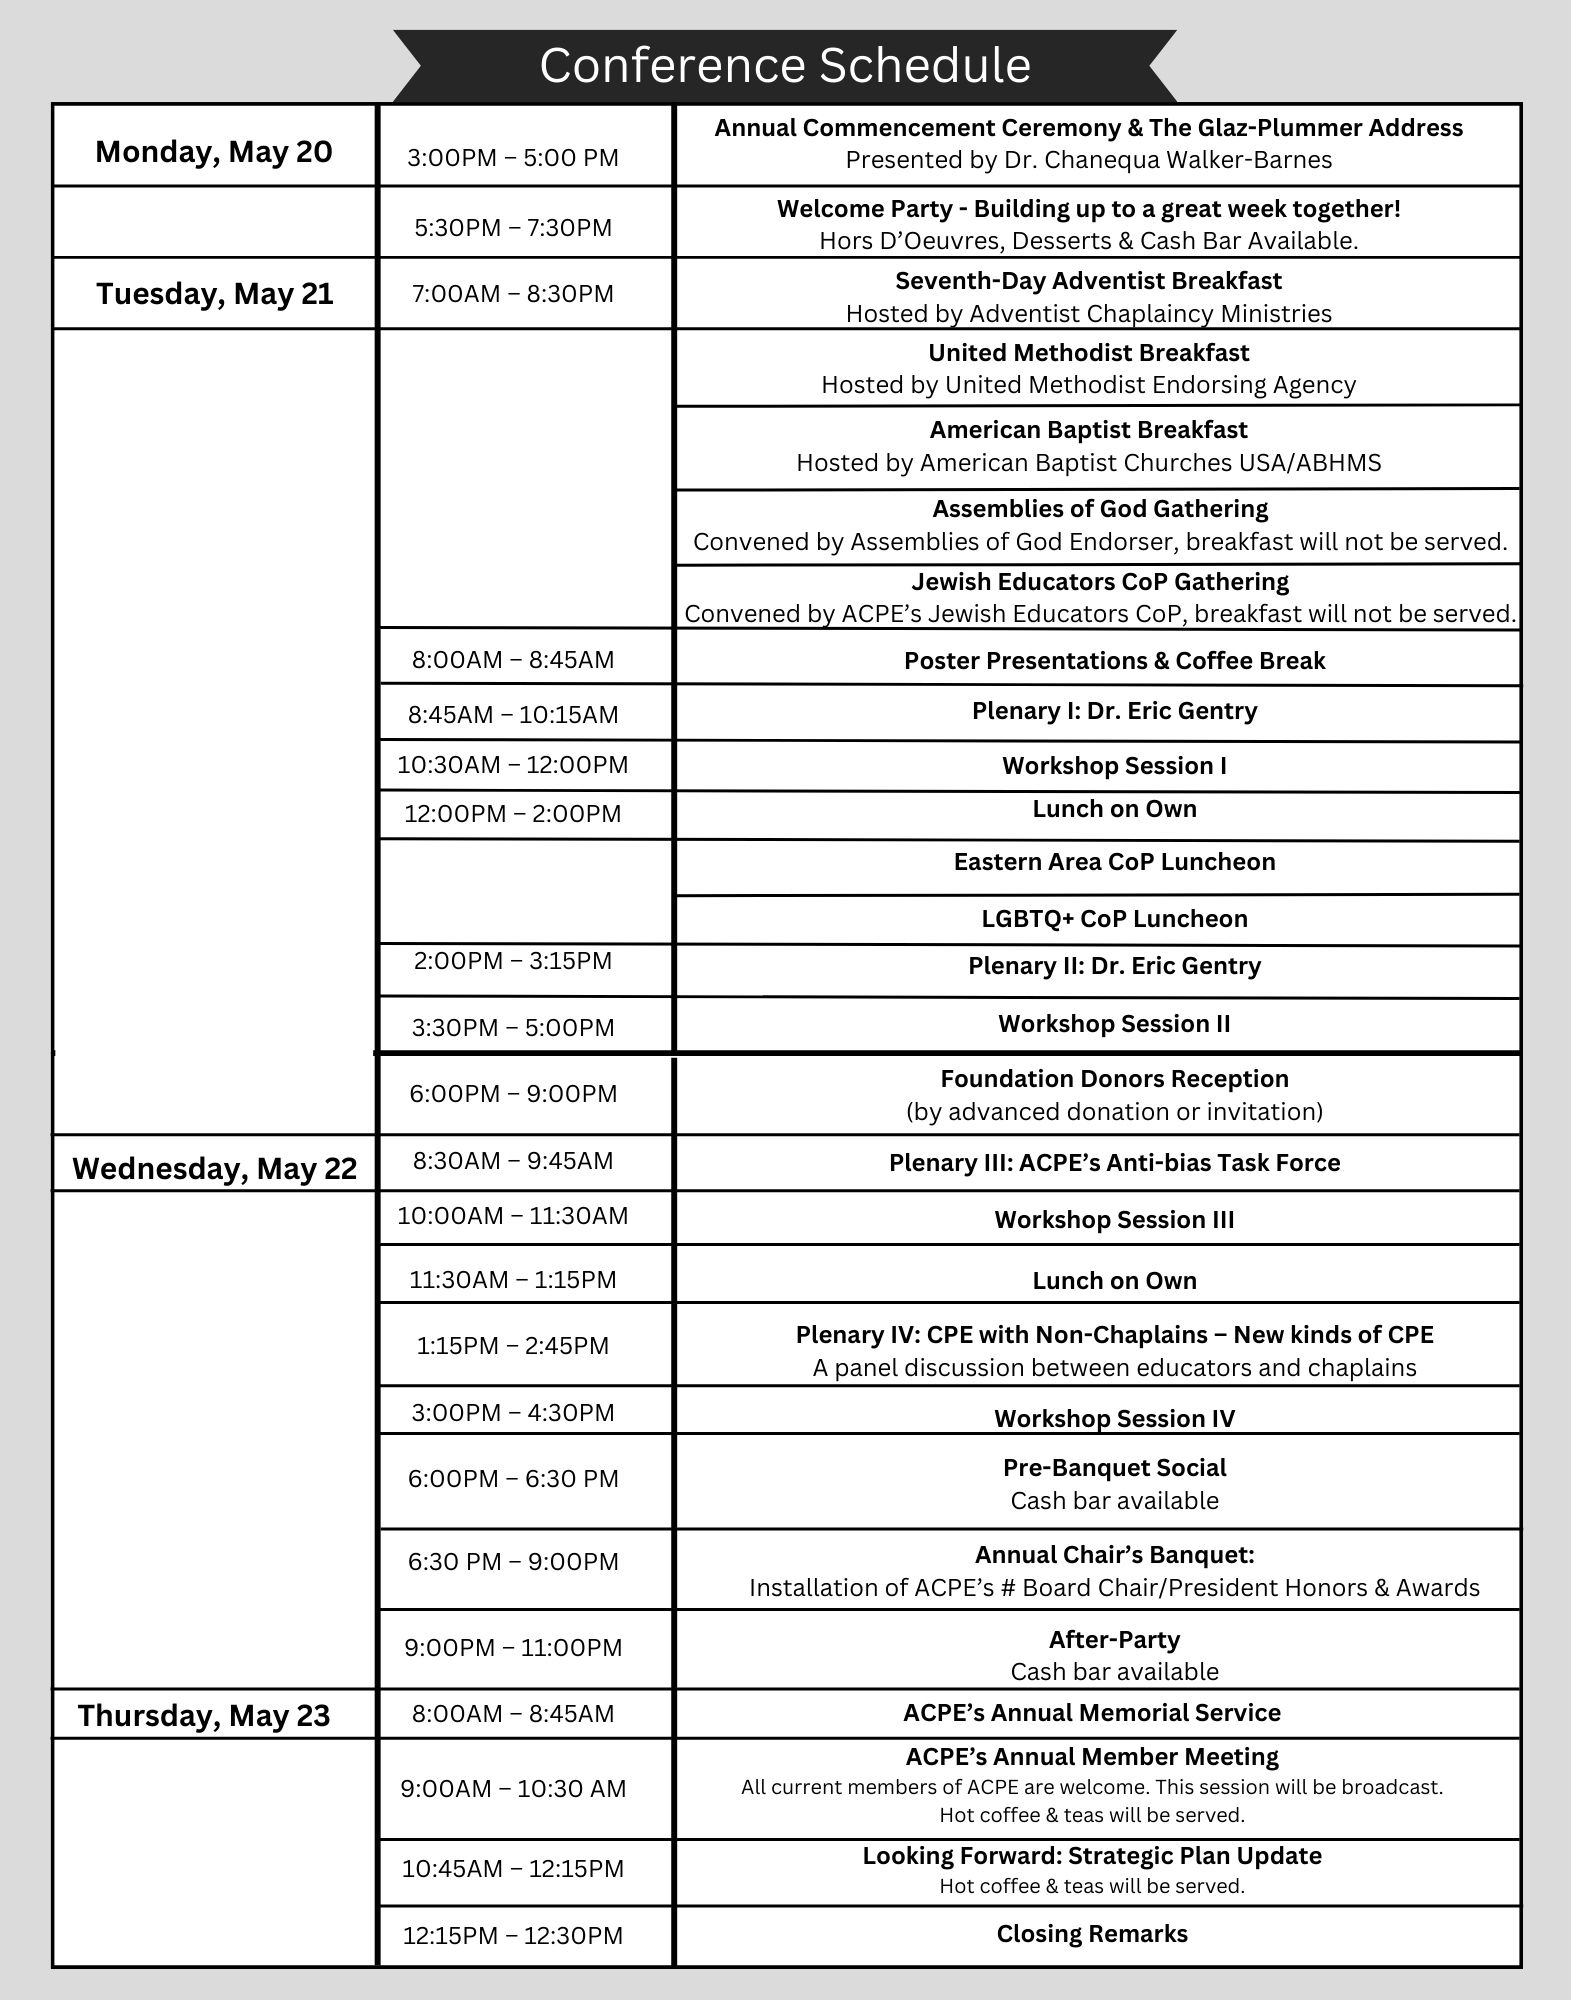 Conference schedule